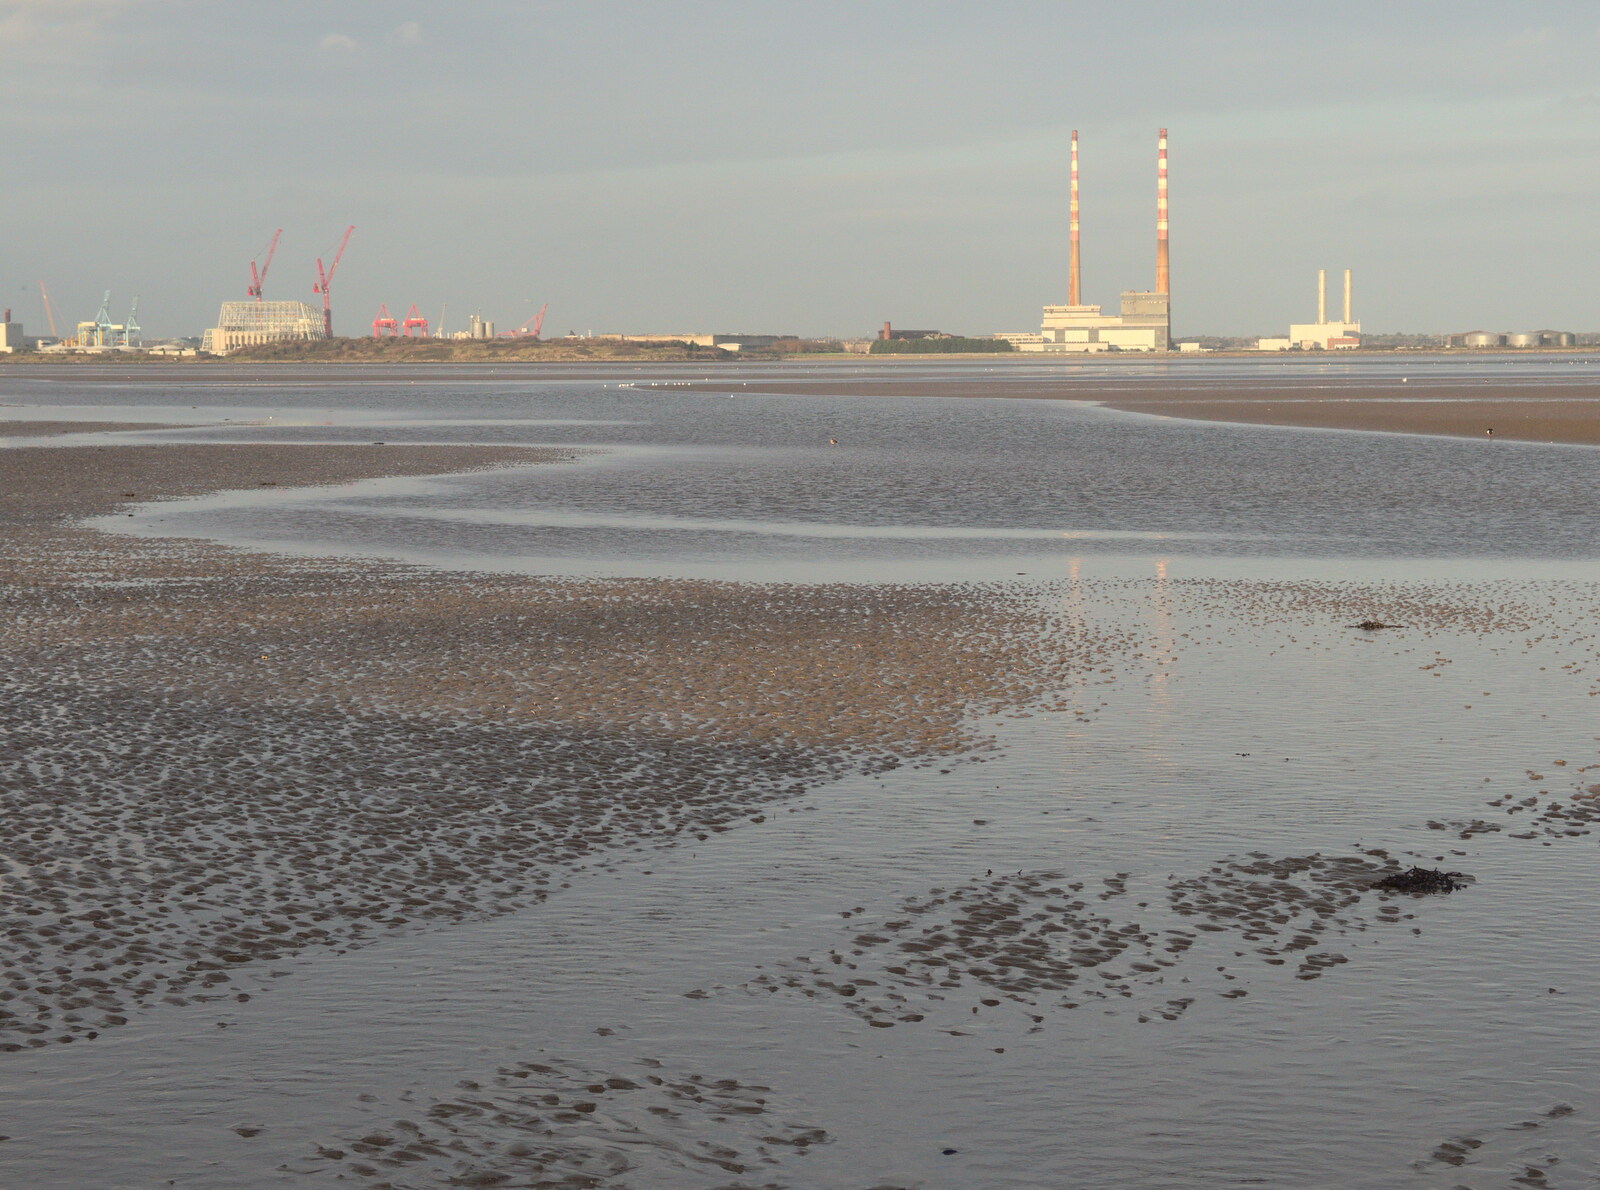 Poolbeg Generating station, aka The Winkies from Christmas Eve in Dublin and Blackrock, Ireland - 24th December 2015